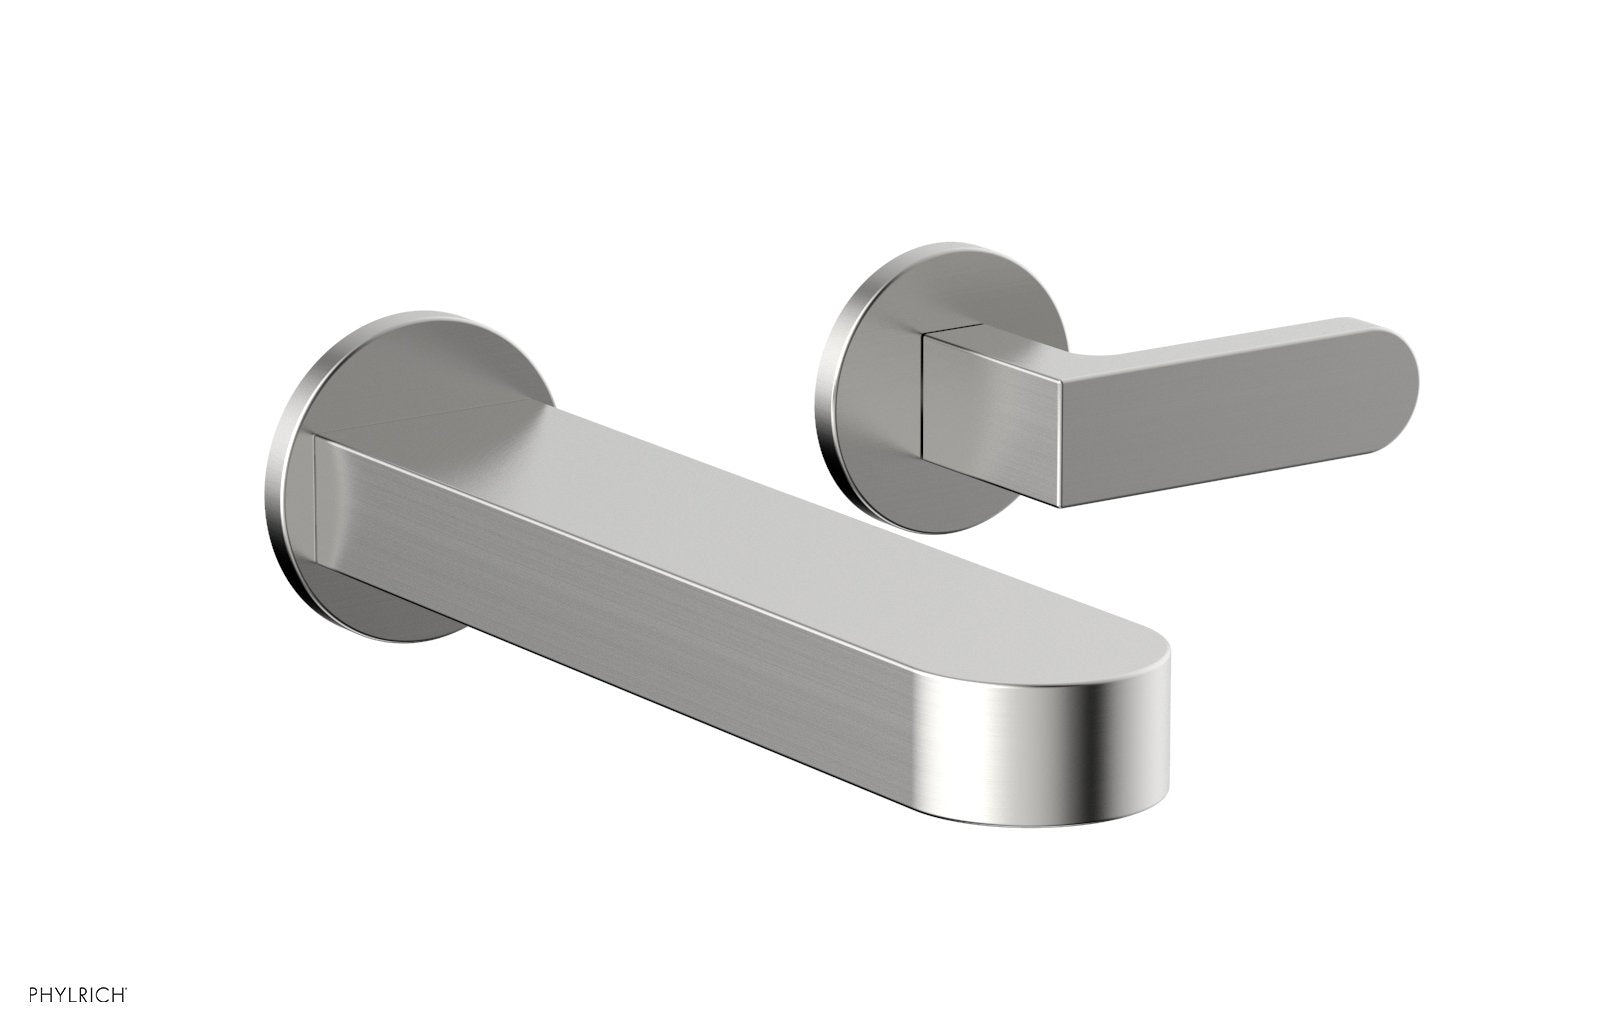 Phylrich ROND Single Handle Wall Lavatory Set - Lever Handles